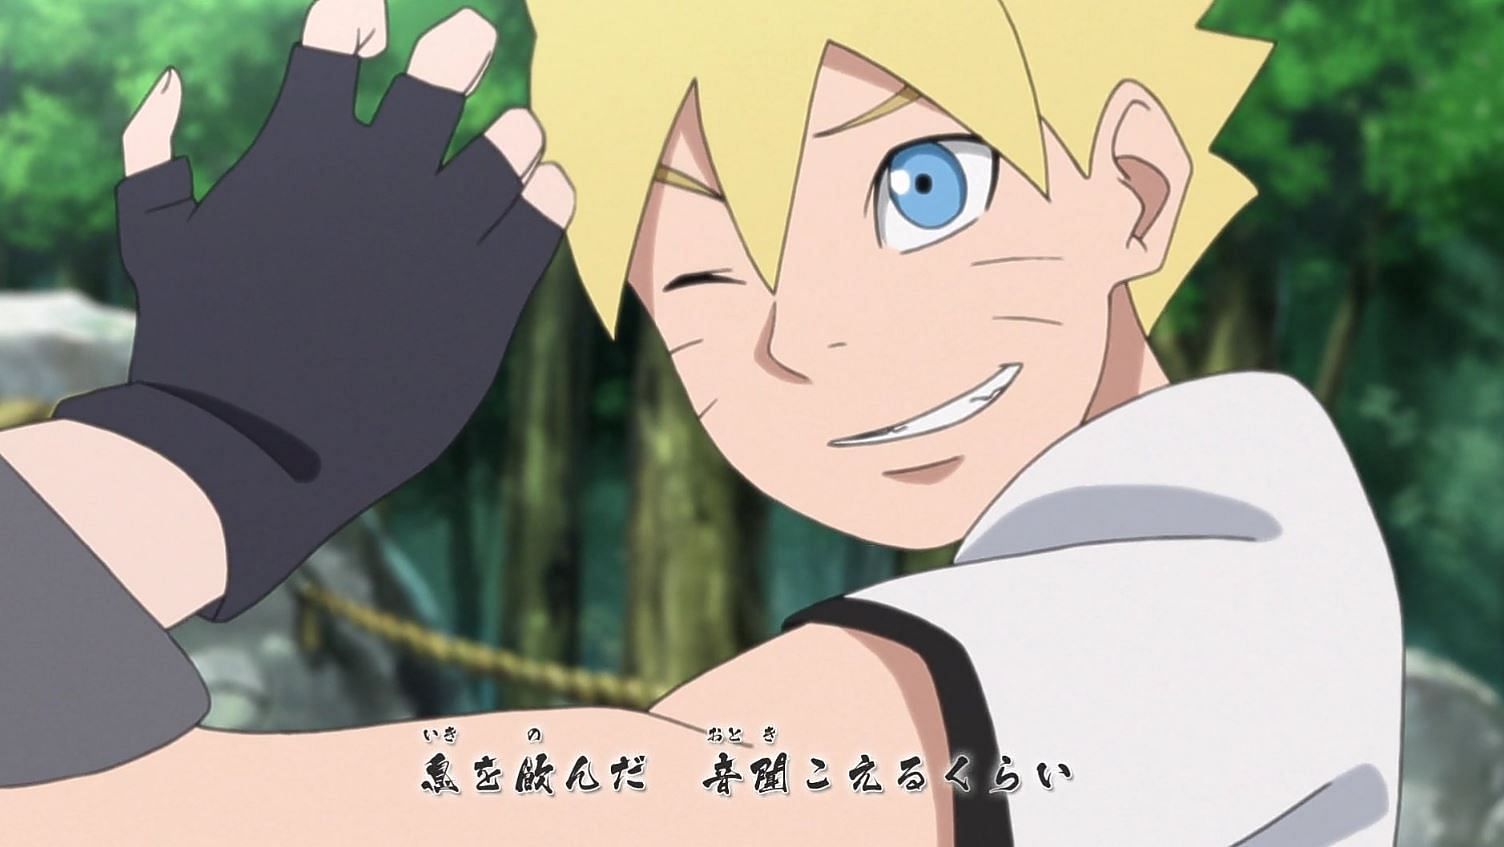 Boruto, we know he has the pure eye. What other eye will he get